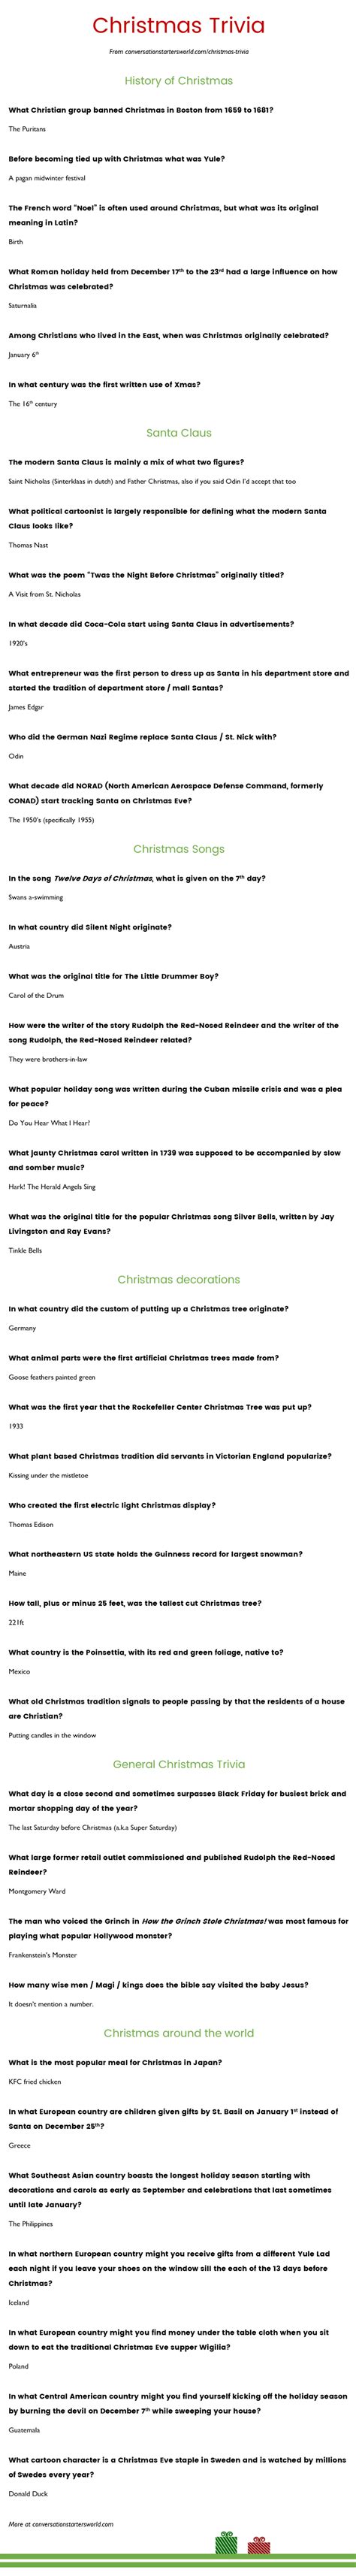 All our quiz questions were written by this website. 40 Challenging Christmas Trivia Questions - How many can ...